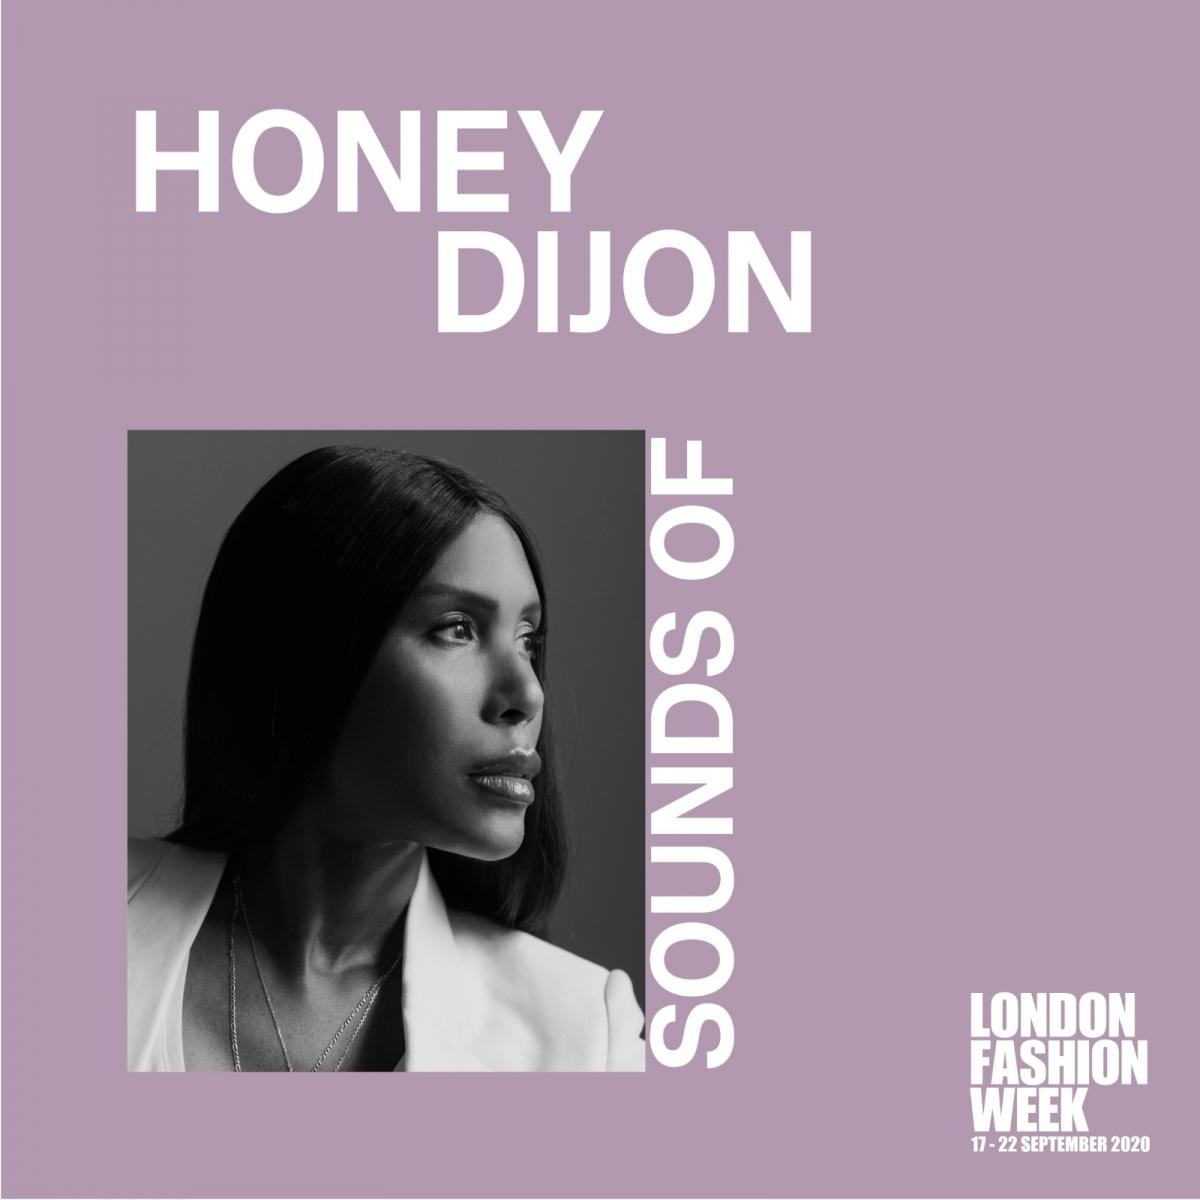 What Does Fashion Sound Like? by Honey Dijon